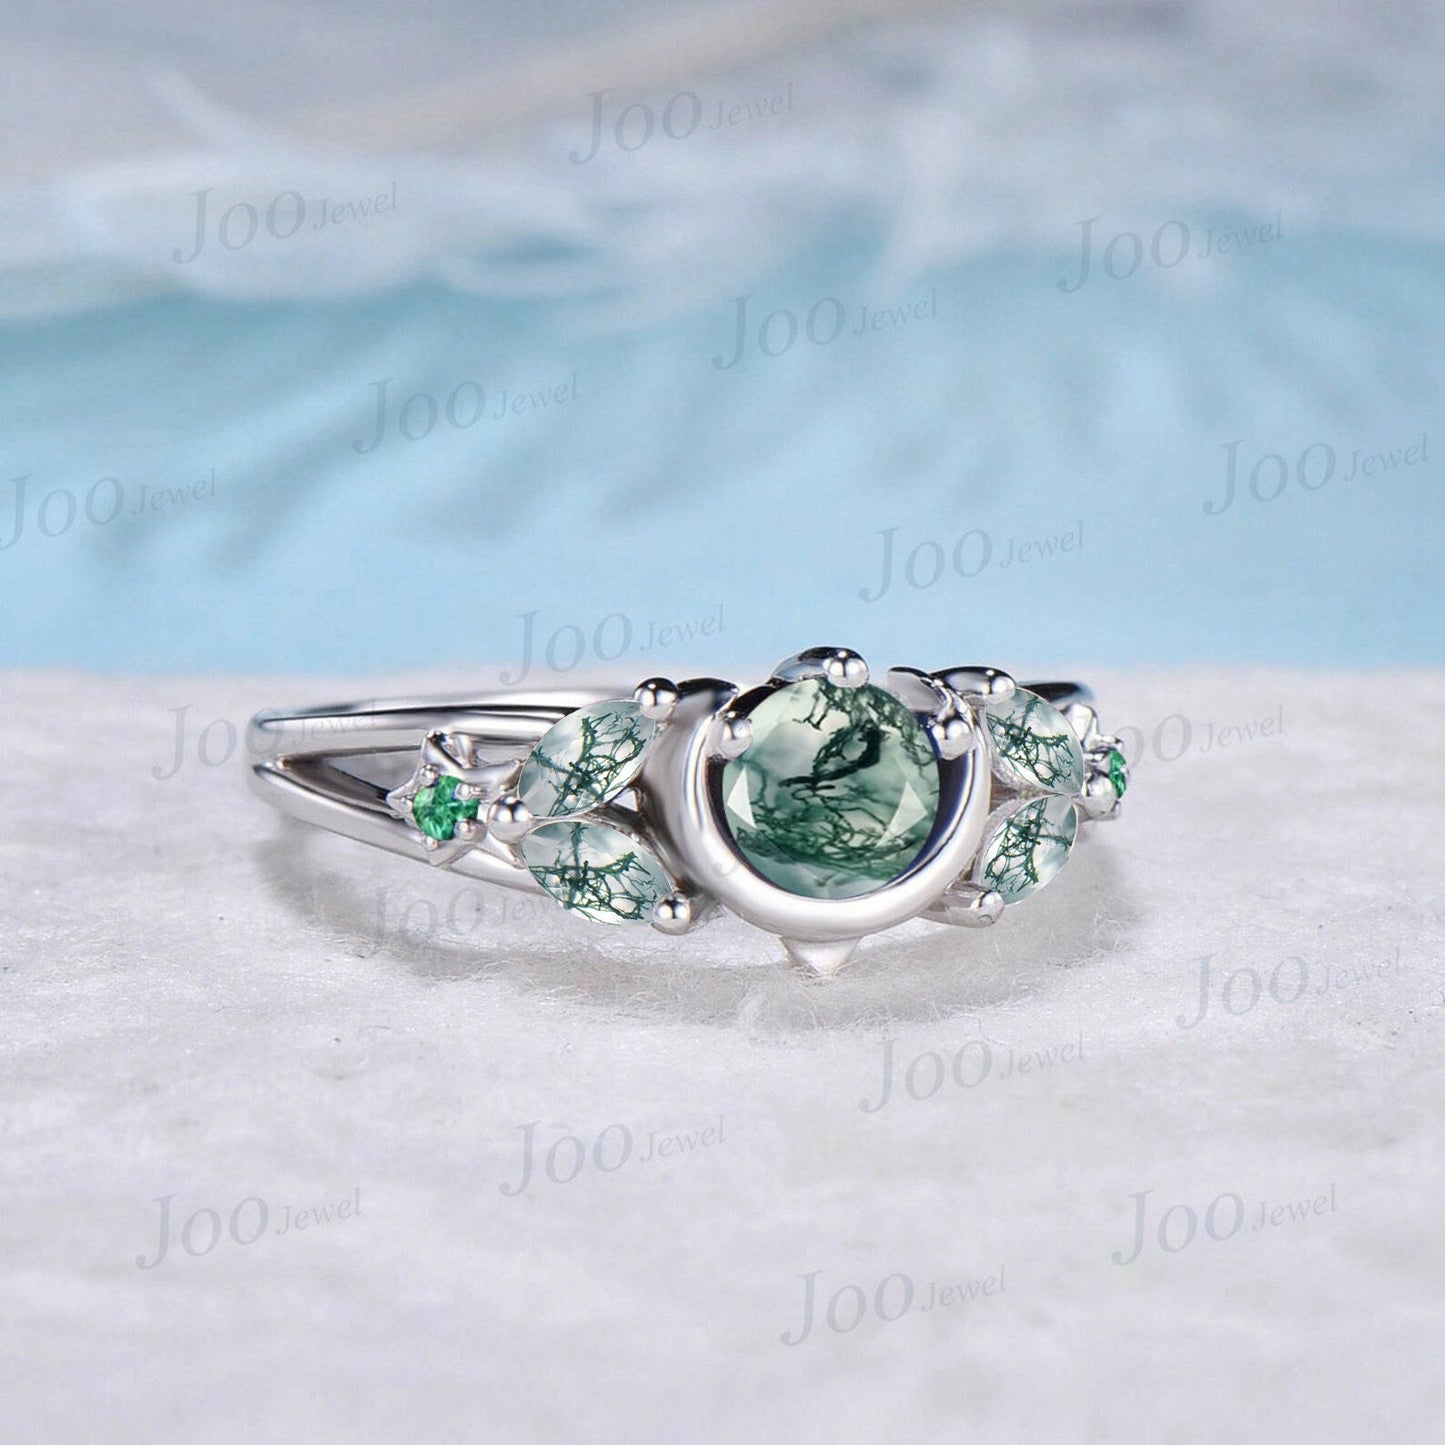 5mm Round Natural Moss Agate Engagement Ring 10K White Gold Moonstone Blue Sapphire Celestial Moon Wedding Ring Split Shank Band Unique Gift